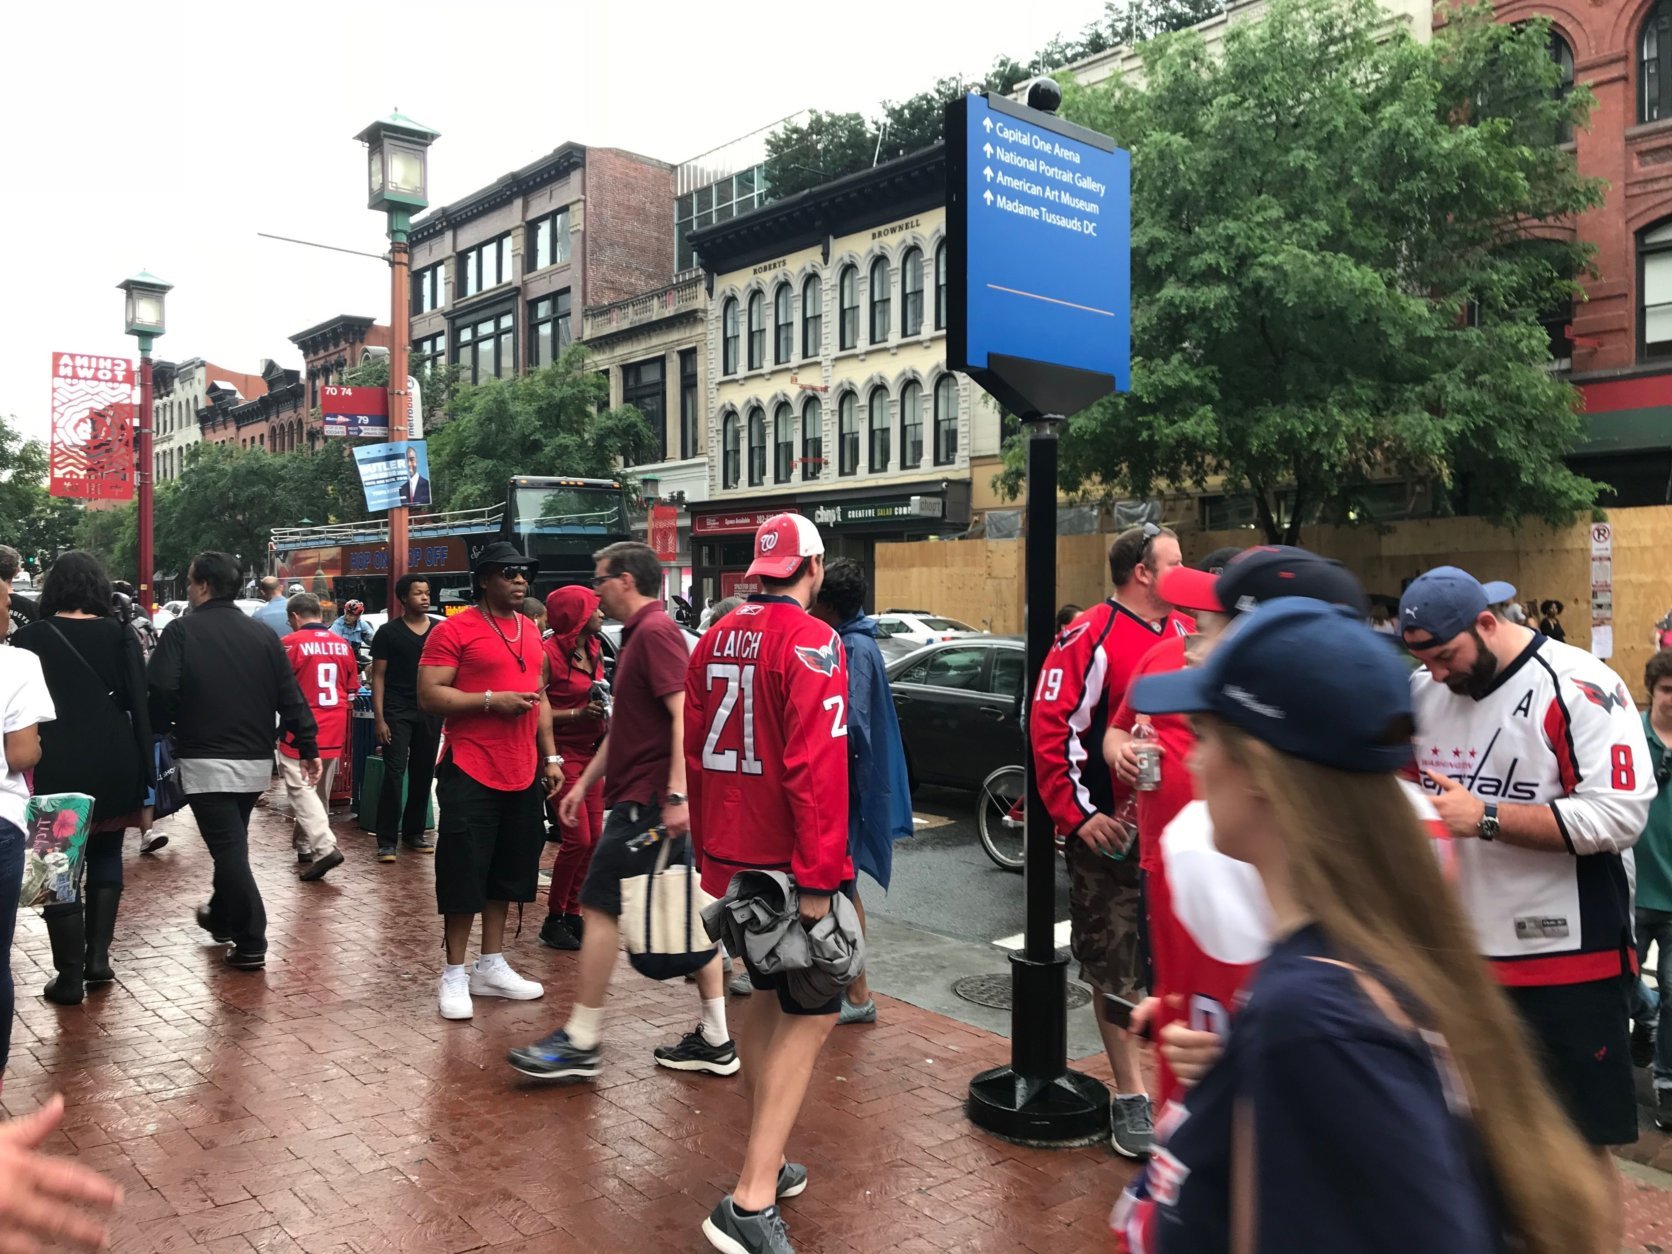 Sidewalks are jammed with people outside Gallery Place before Game 3 of the Stanley Cup Final between the Washington Capitals and the Vegas Golden Knights on Saturday, Jne 2, 2018. (WTOP/Dick Uliano)